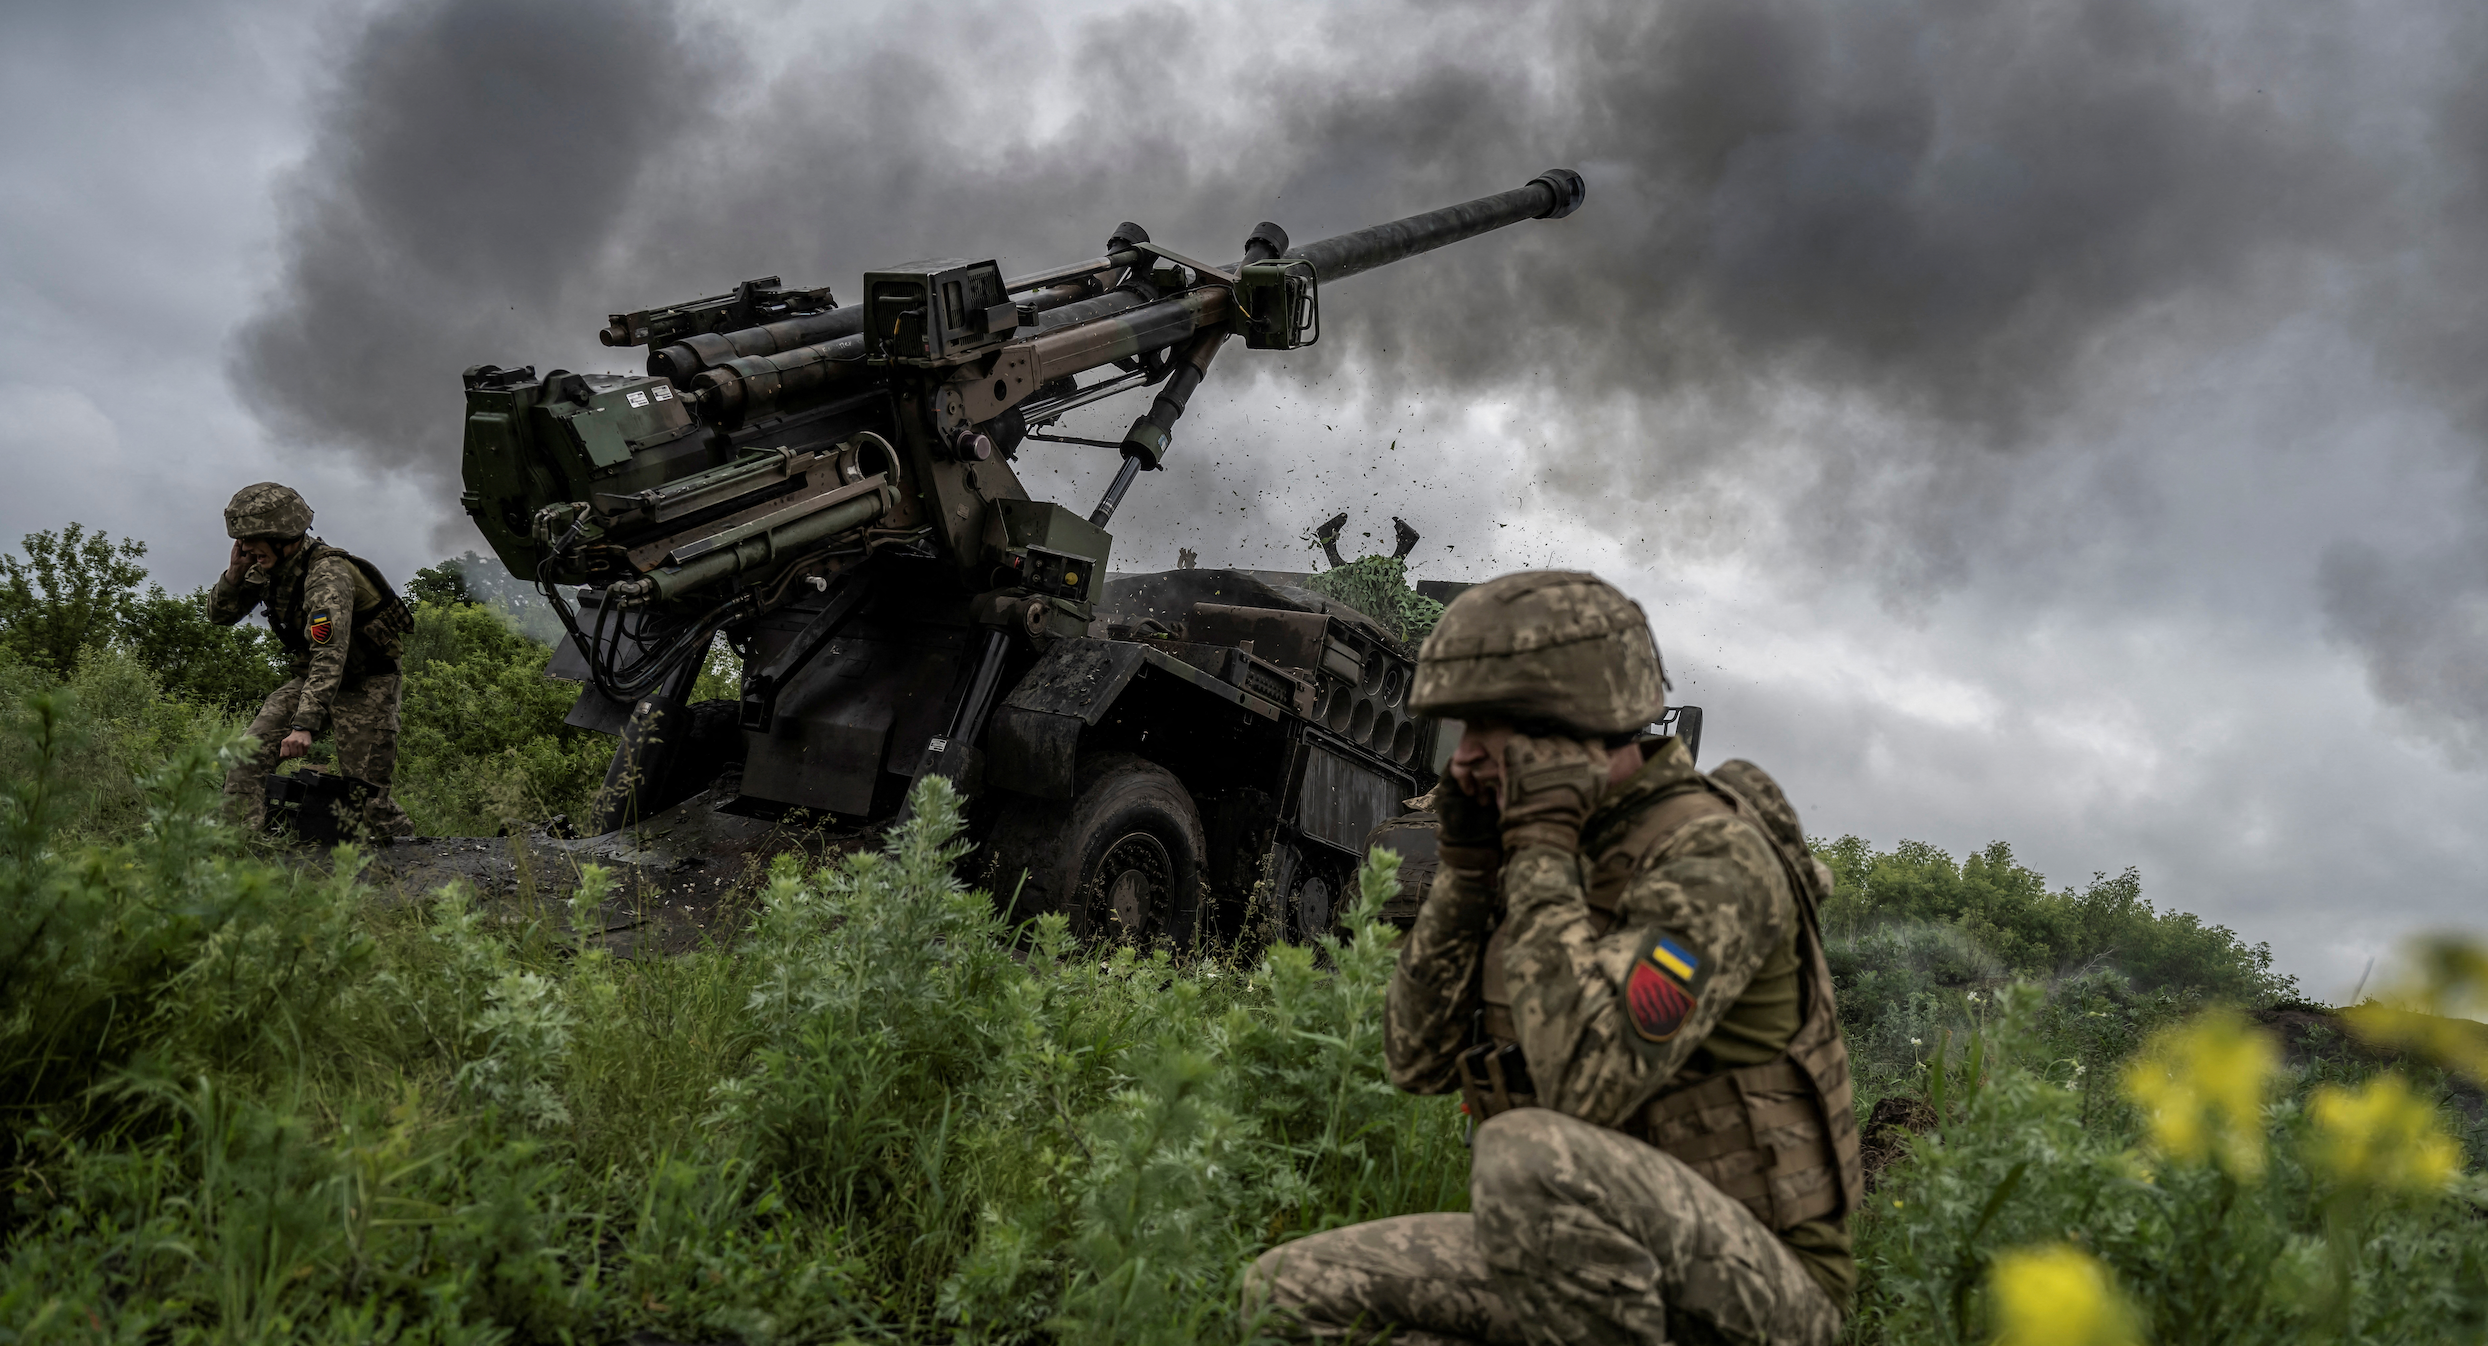 Ukrainian service members of the 55th Separate Artillery Brigade fire a Caesar self-propelled howitzer towards Russian troops, amid Russia's attack on Ukraine